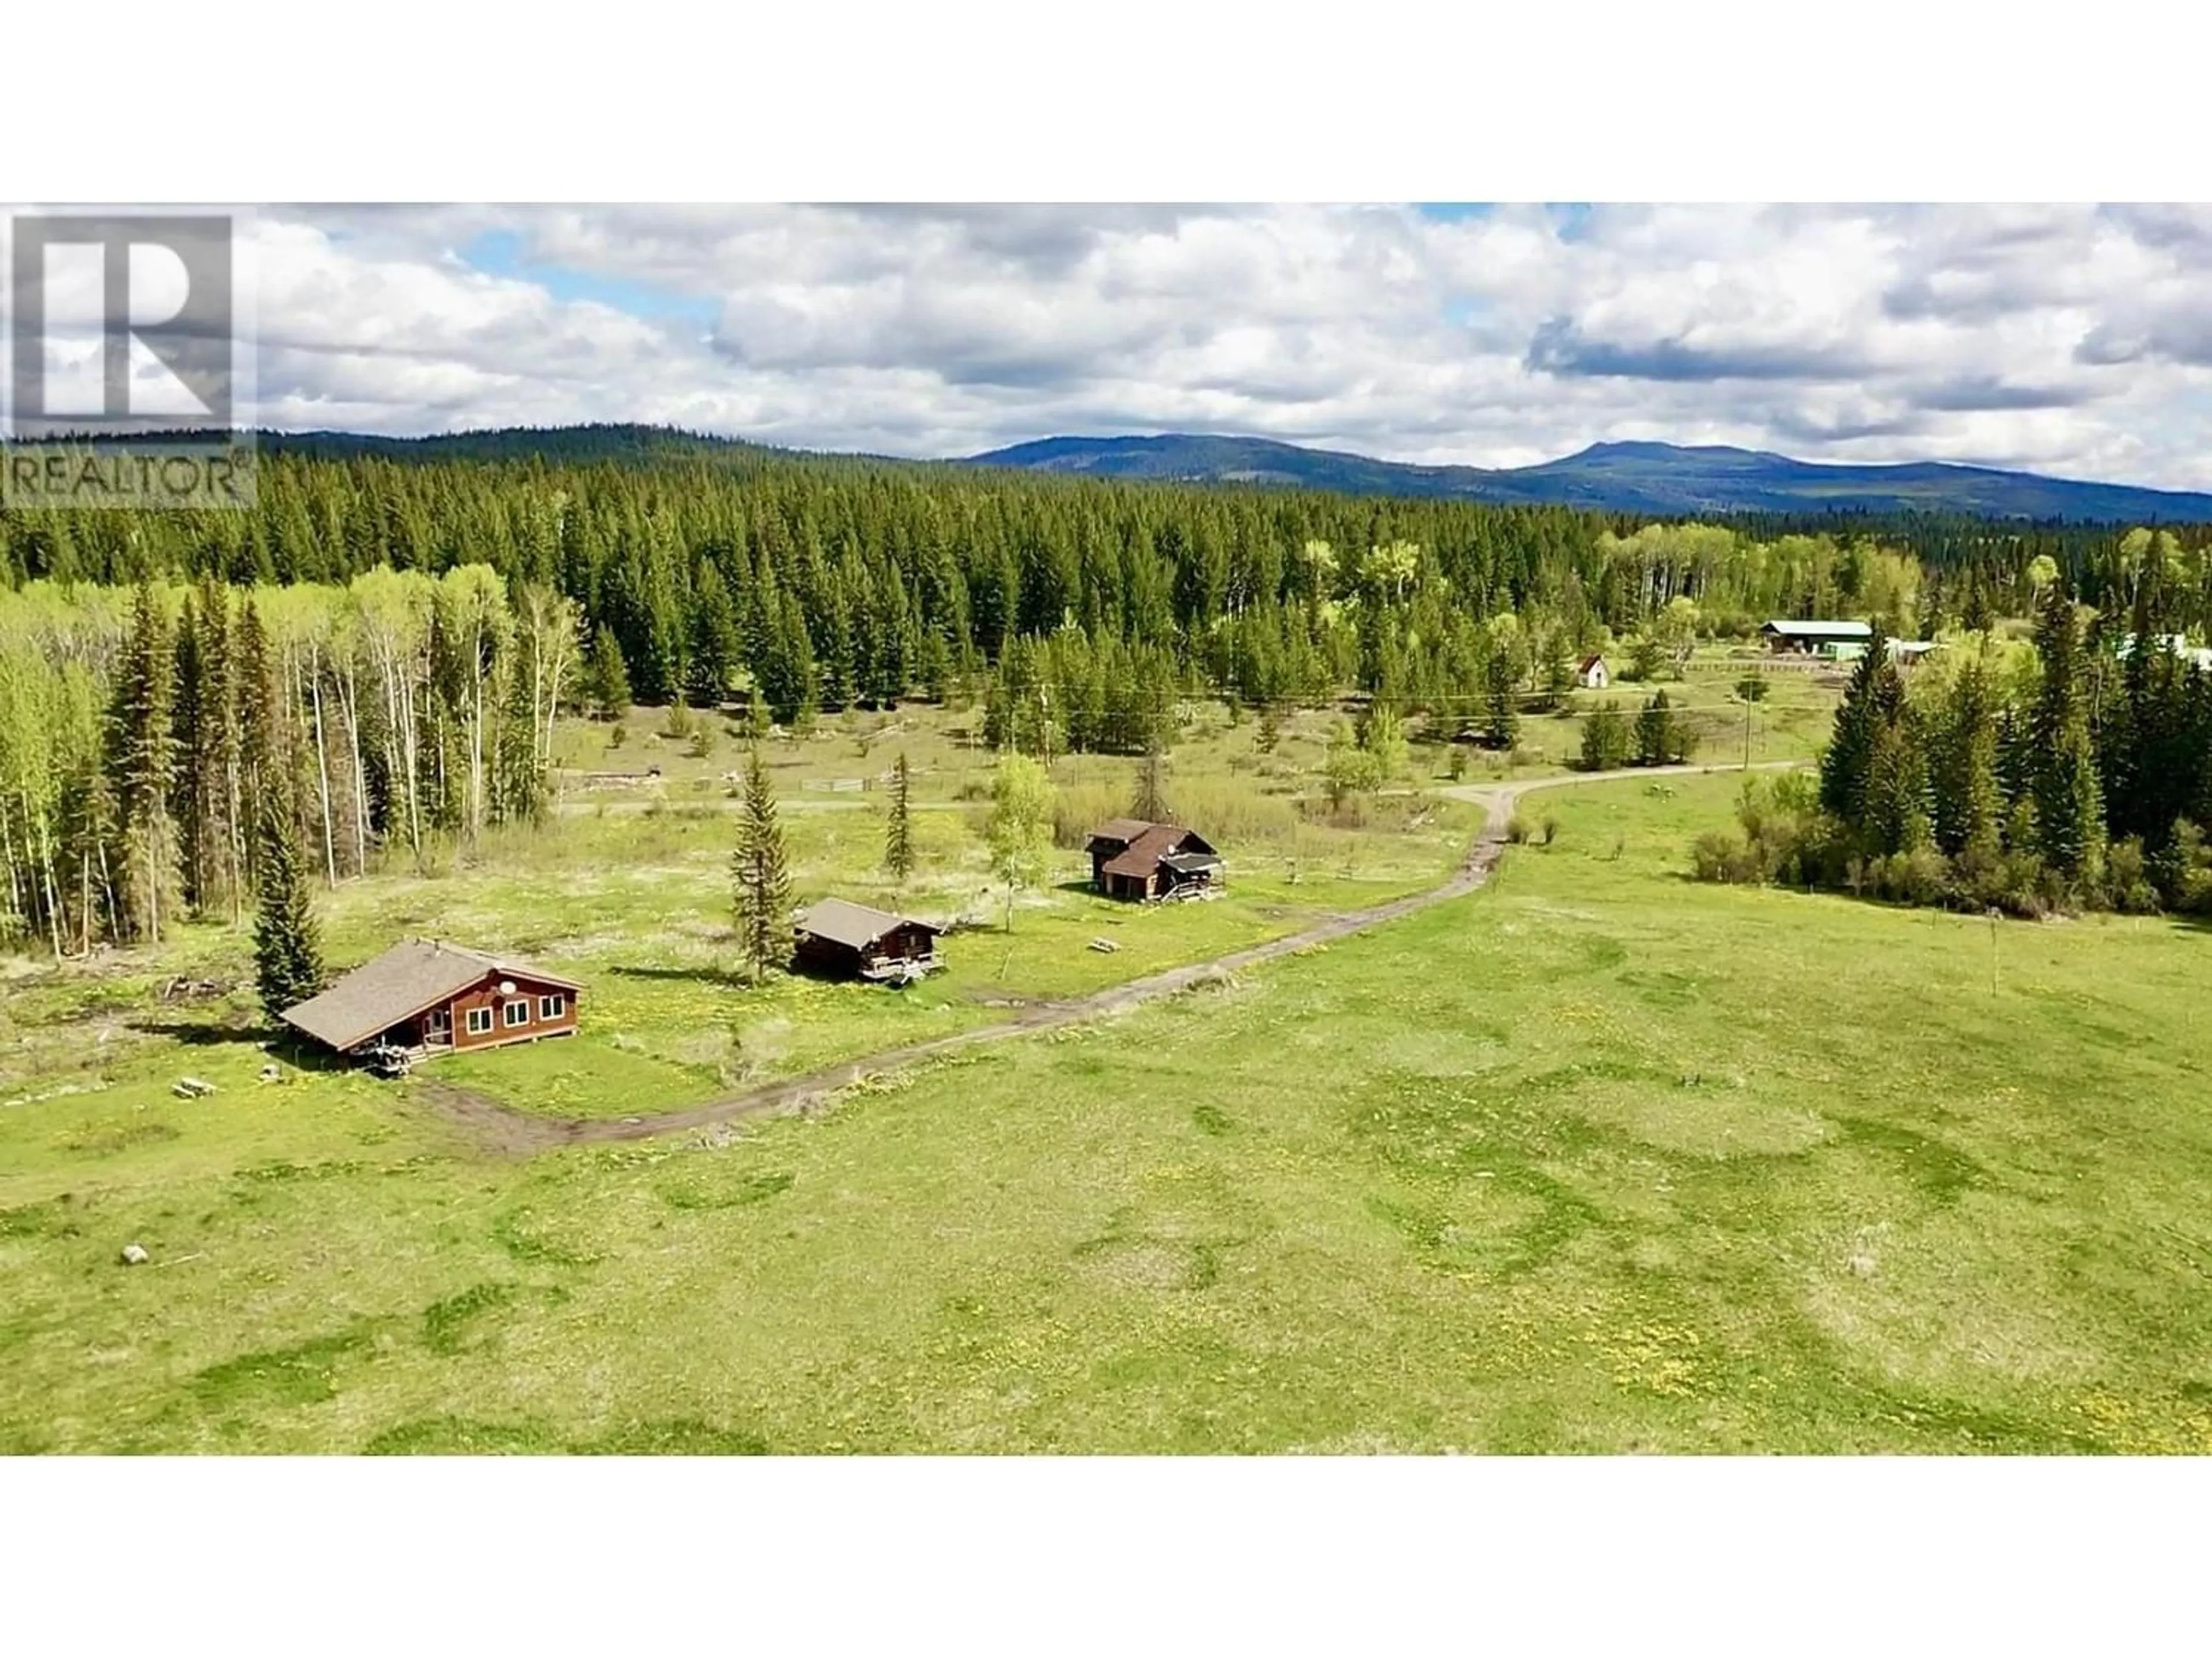 Forest view for 3710 WHITEHORSE LAKE ROAD, Lac La Hache British Columbia V0K1T0